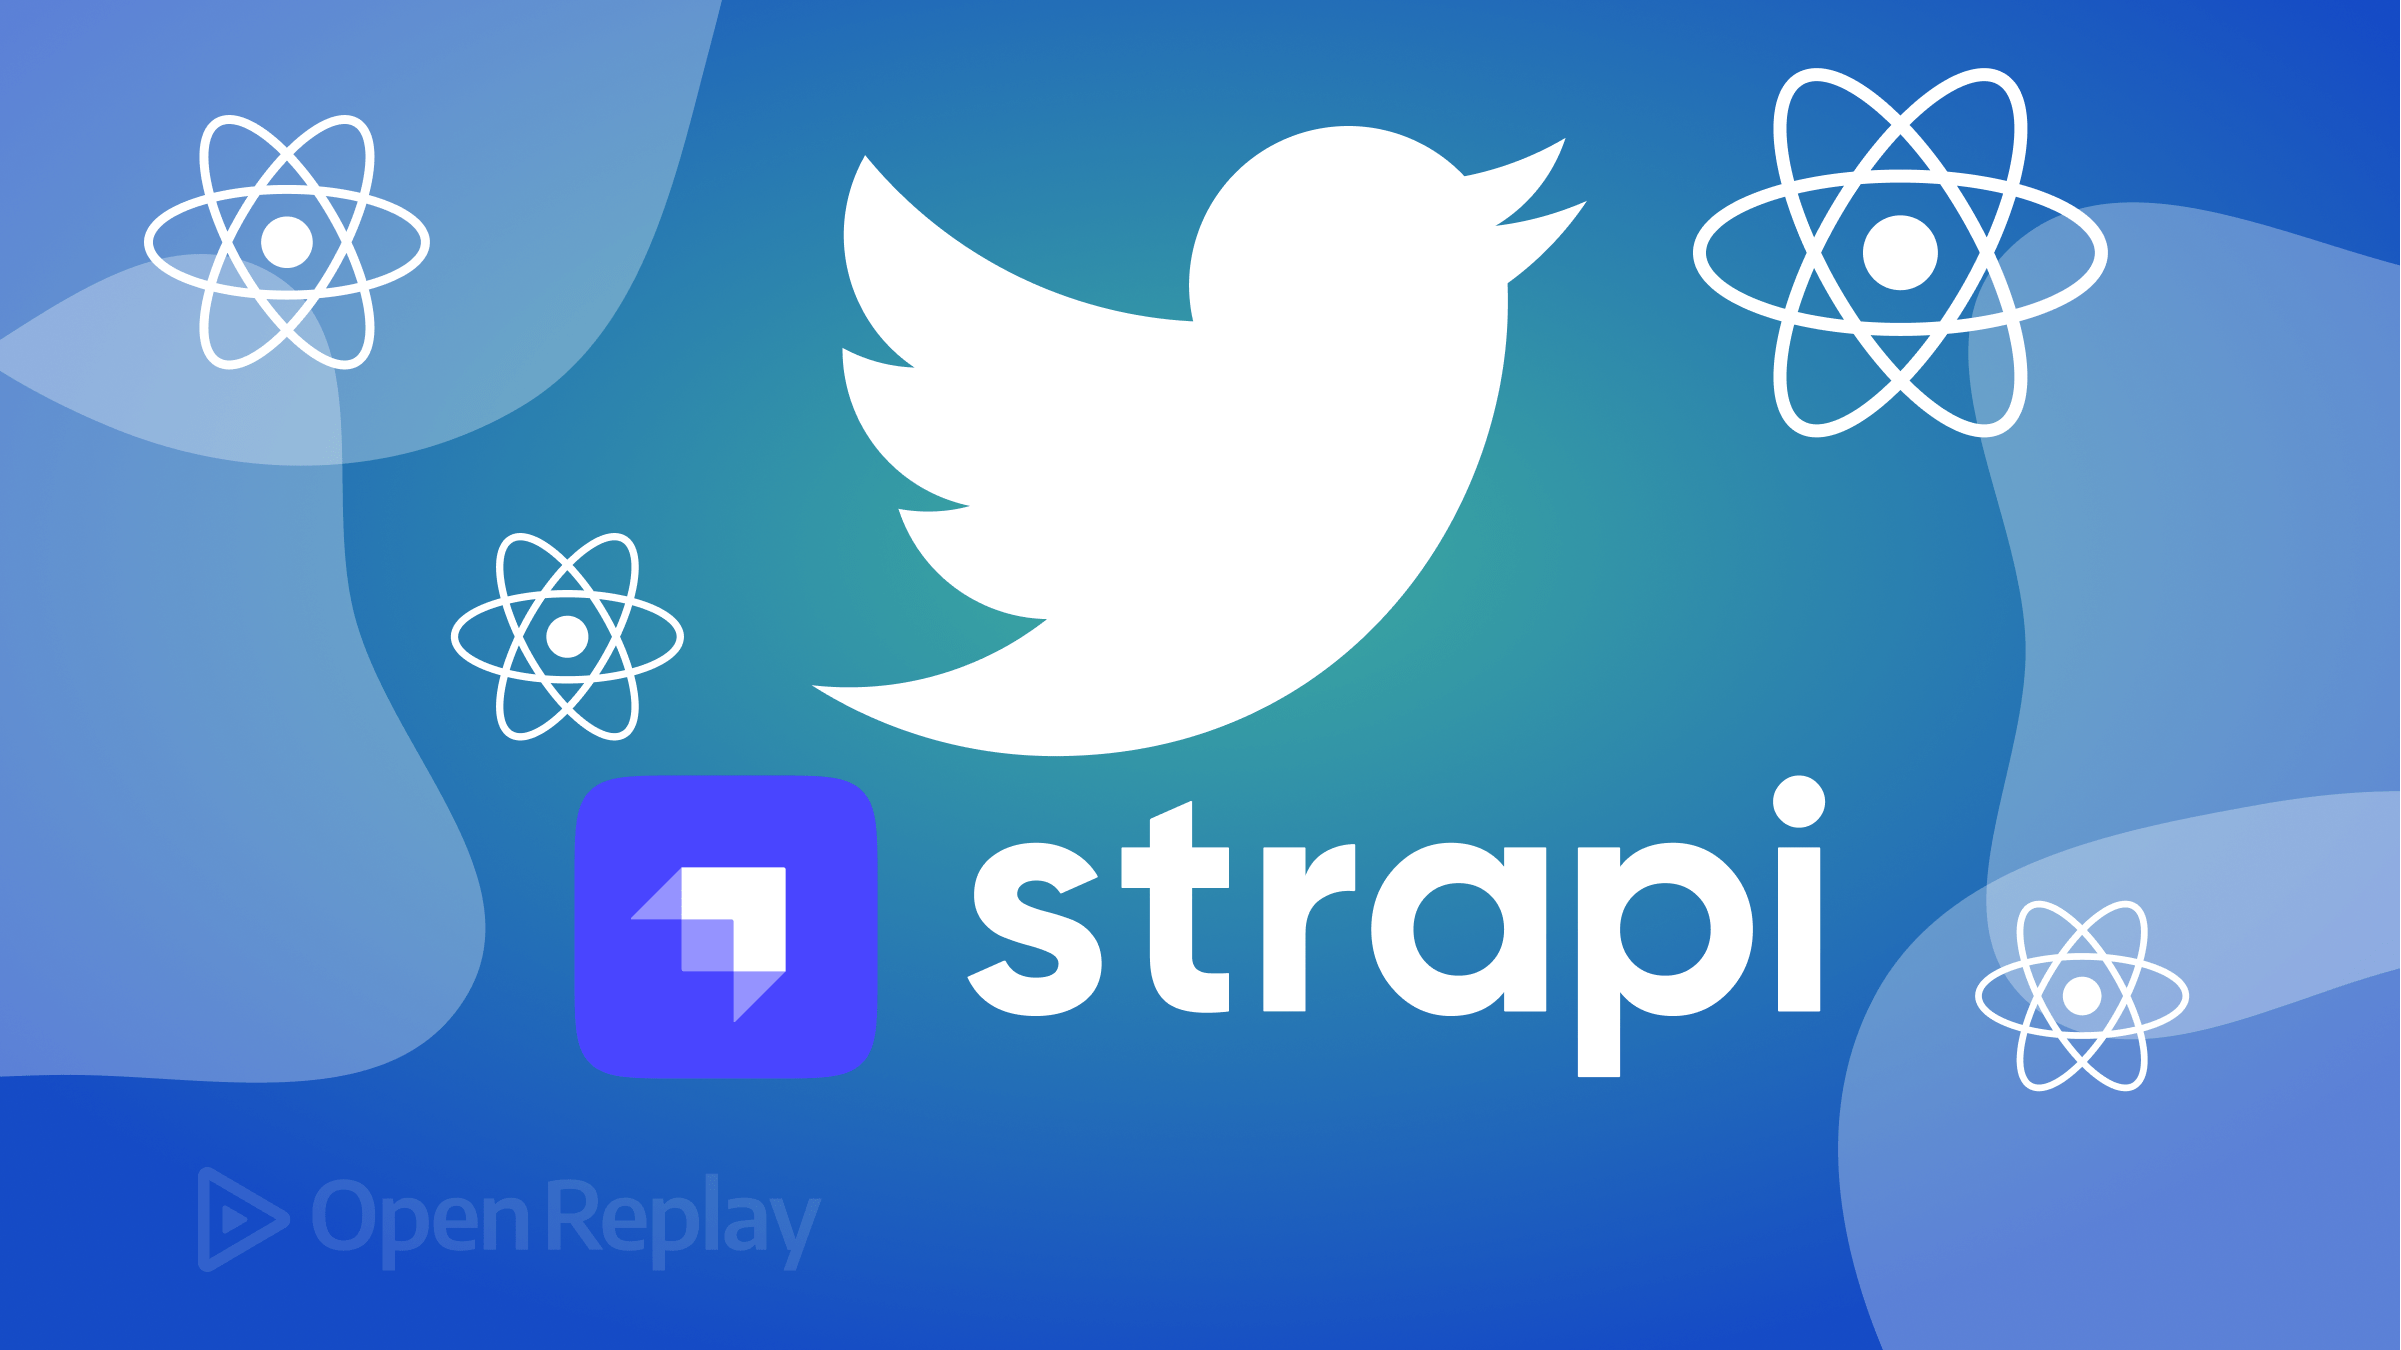 Build a Twitter clone with Strapi